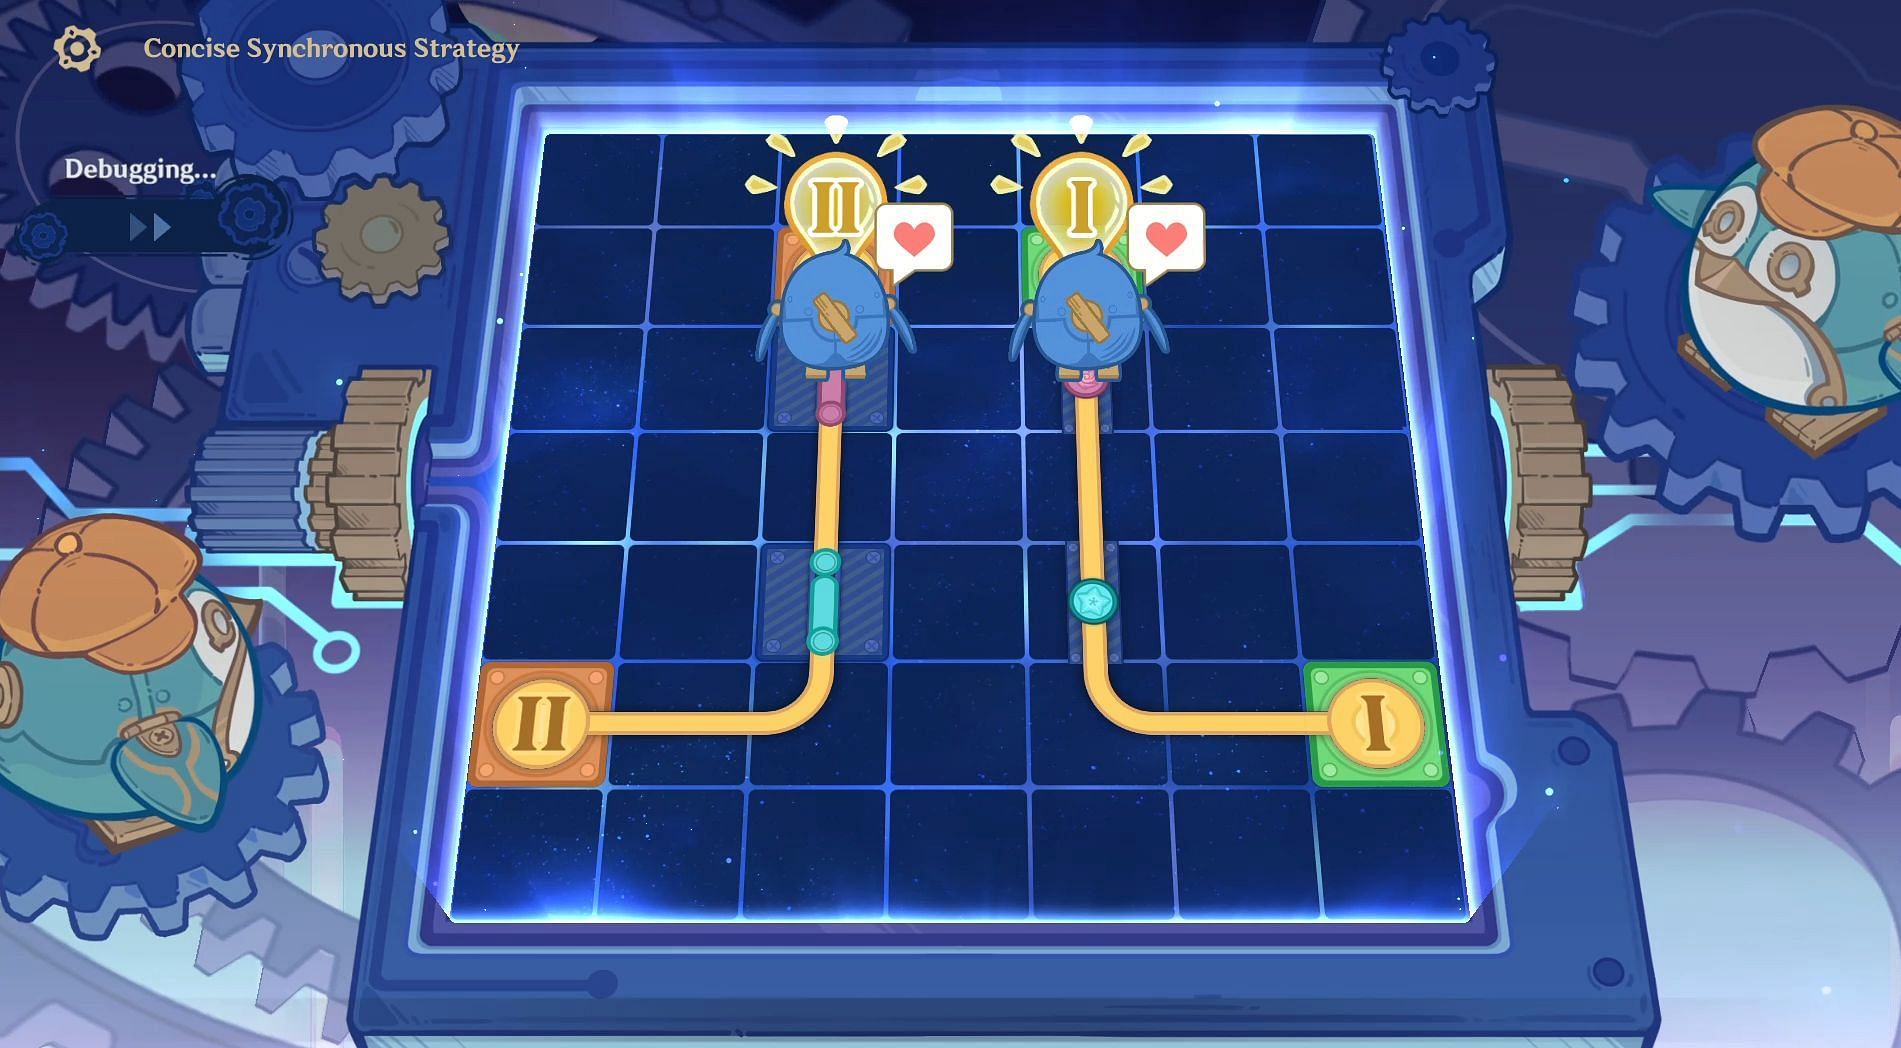 Concise Synchronous Strategy puzzle solution (Image via HoYoverse)